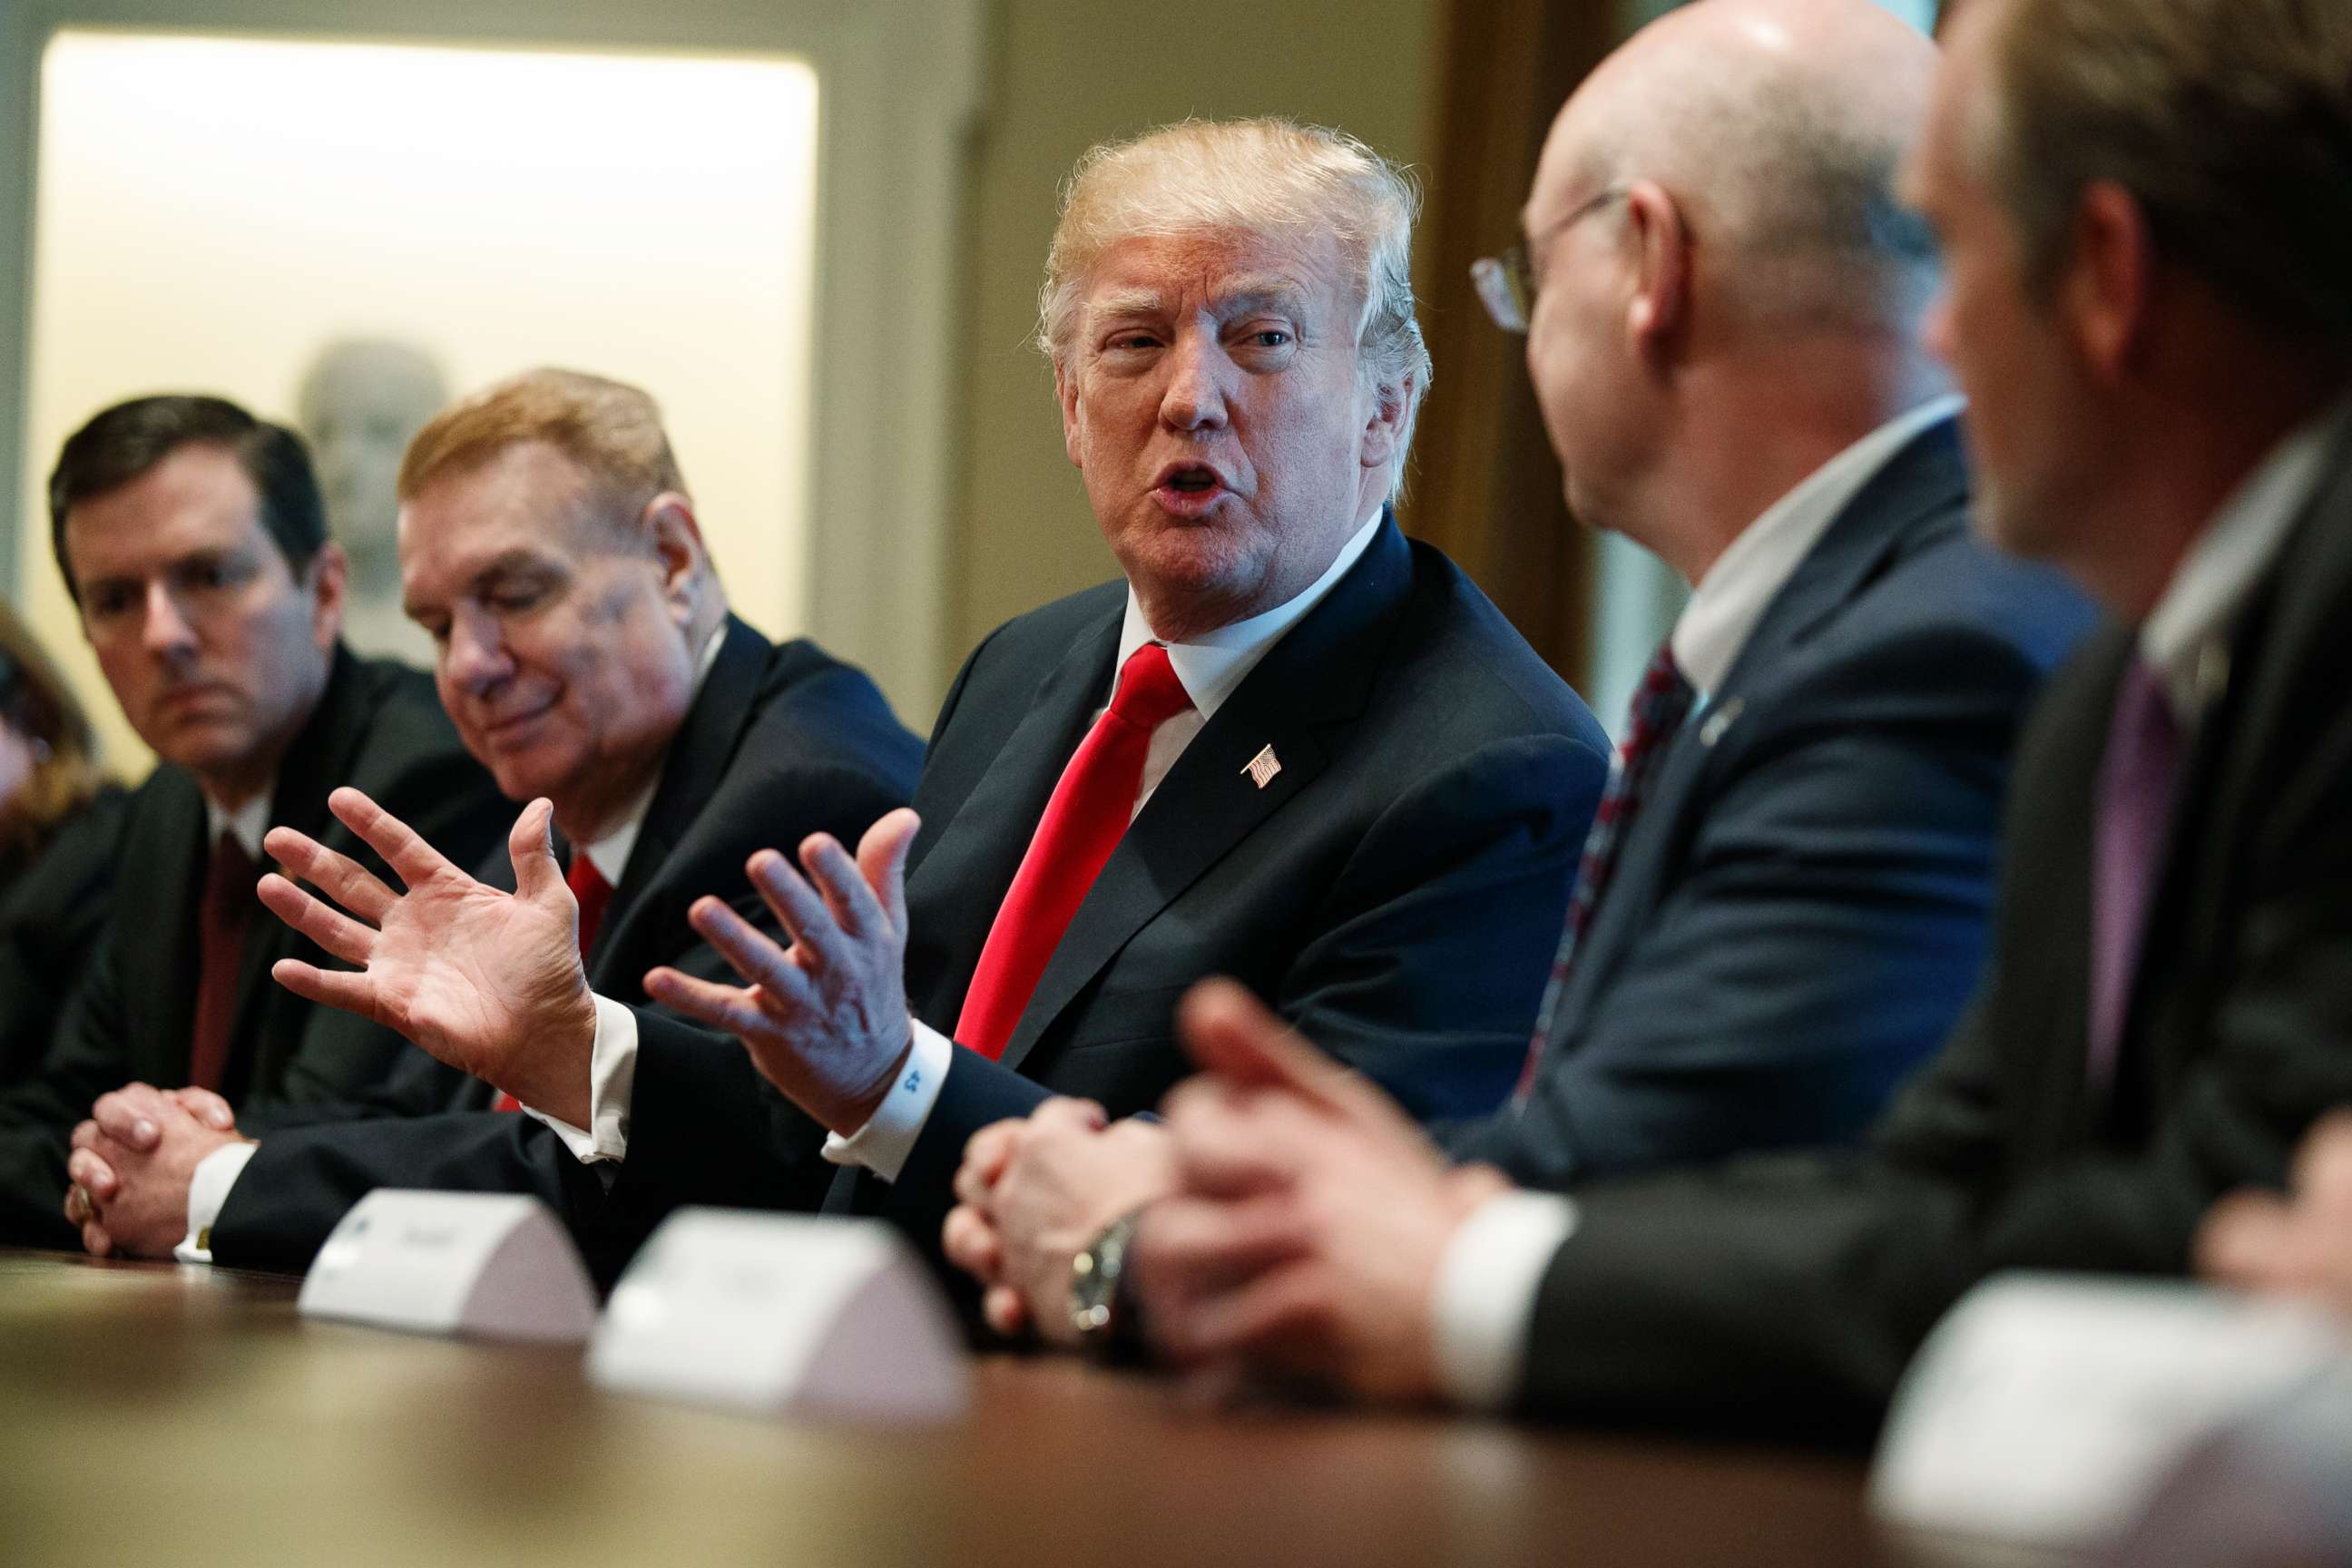 PHOTO: President Donald Trump speaks during a meeting with steel and aluminum executives in the Cabinet Room of the White House, March 1, 2018.